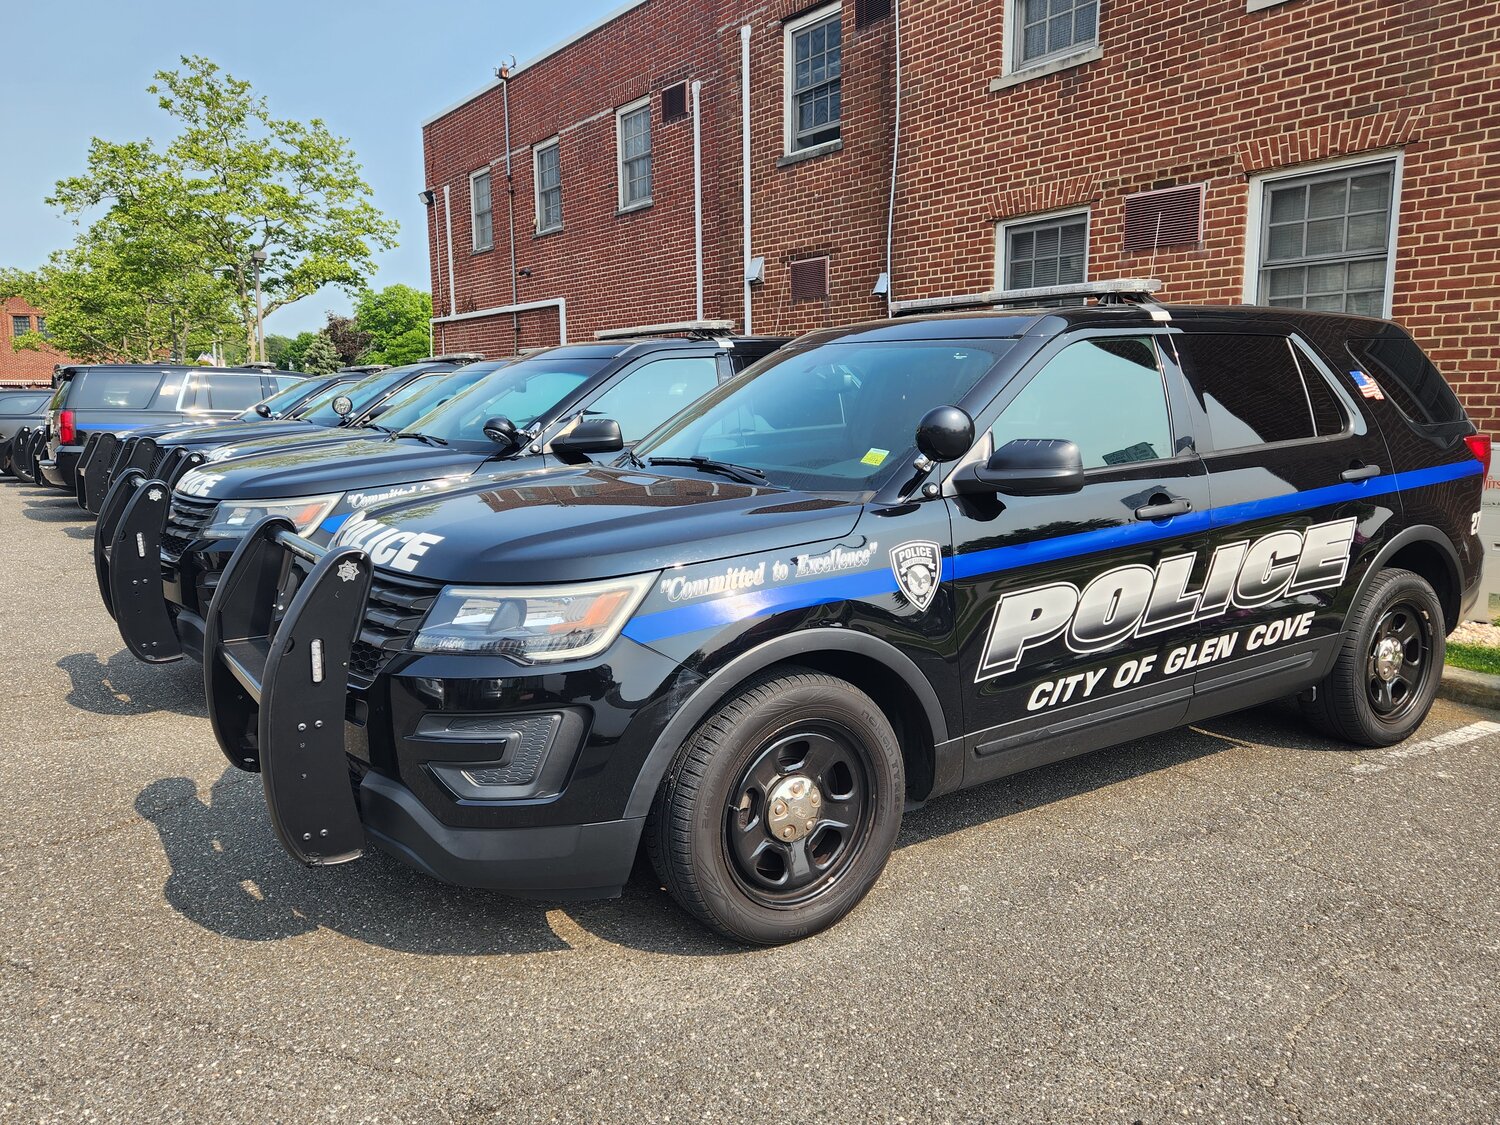 Glen Cove police responded to a call alleging a woman was being held captive by her boyfriend.